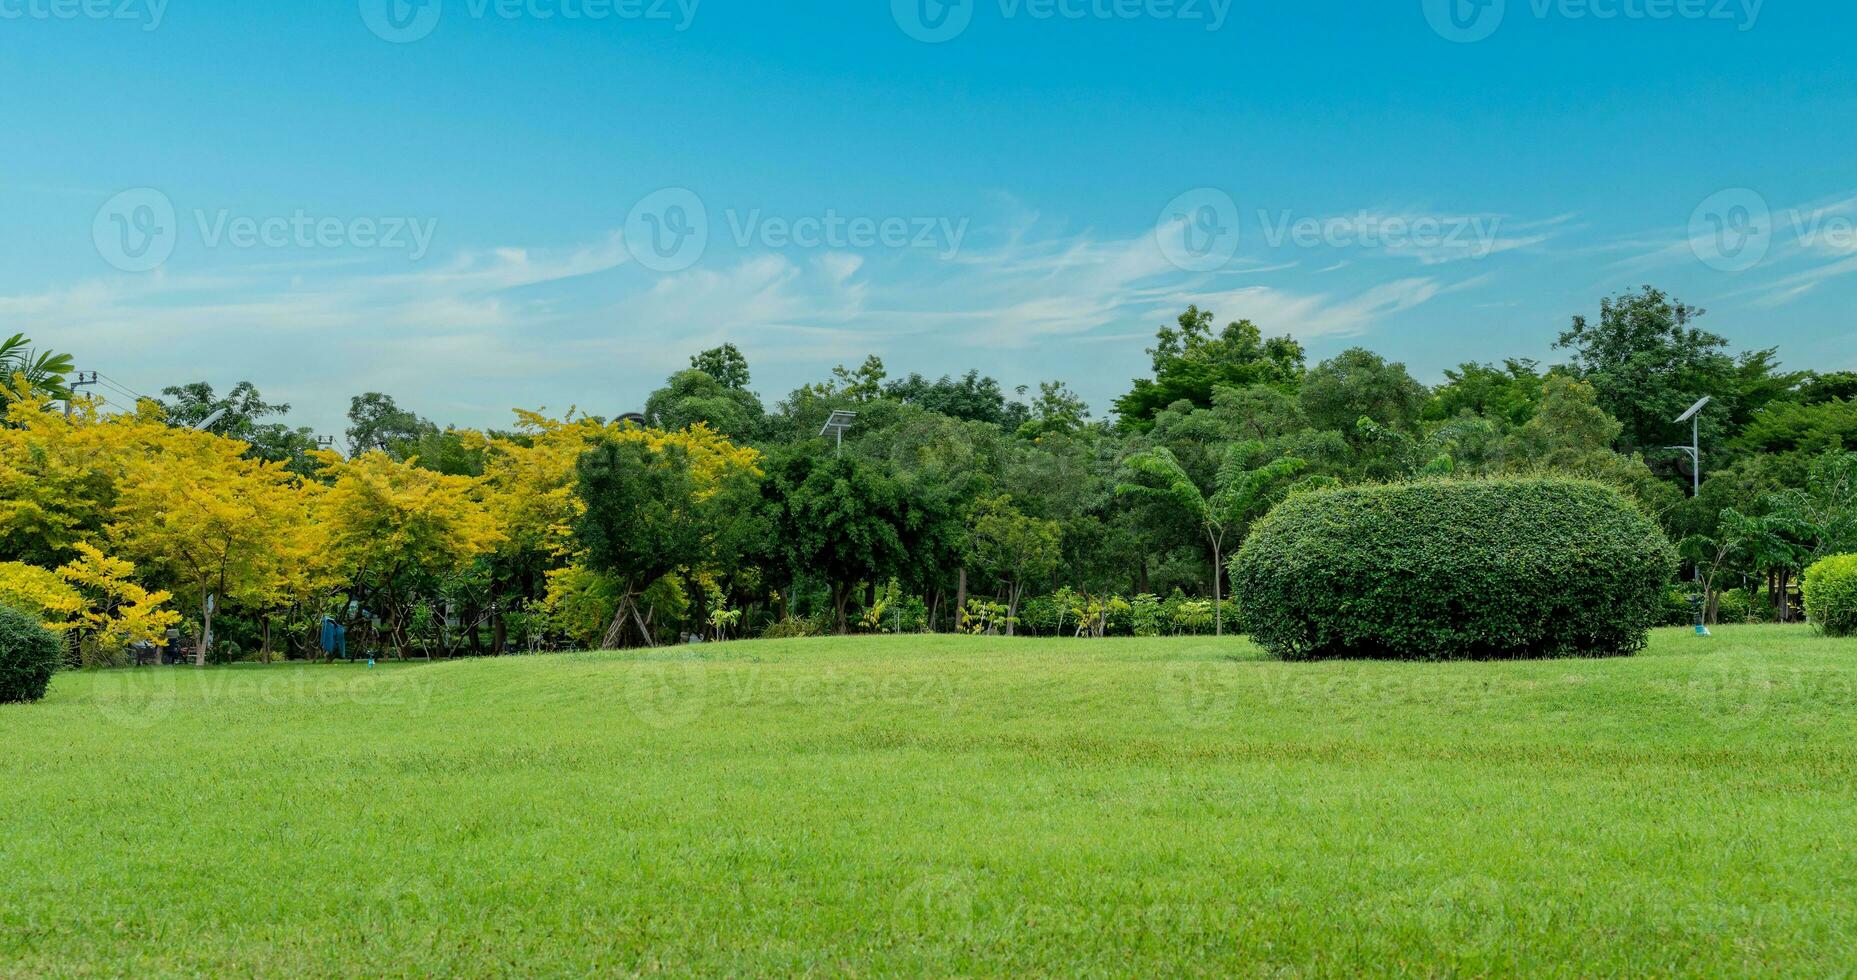 Beautiful grass field and tree with blue sky. Countryside landscape view background photo